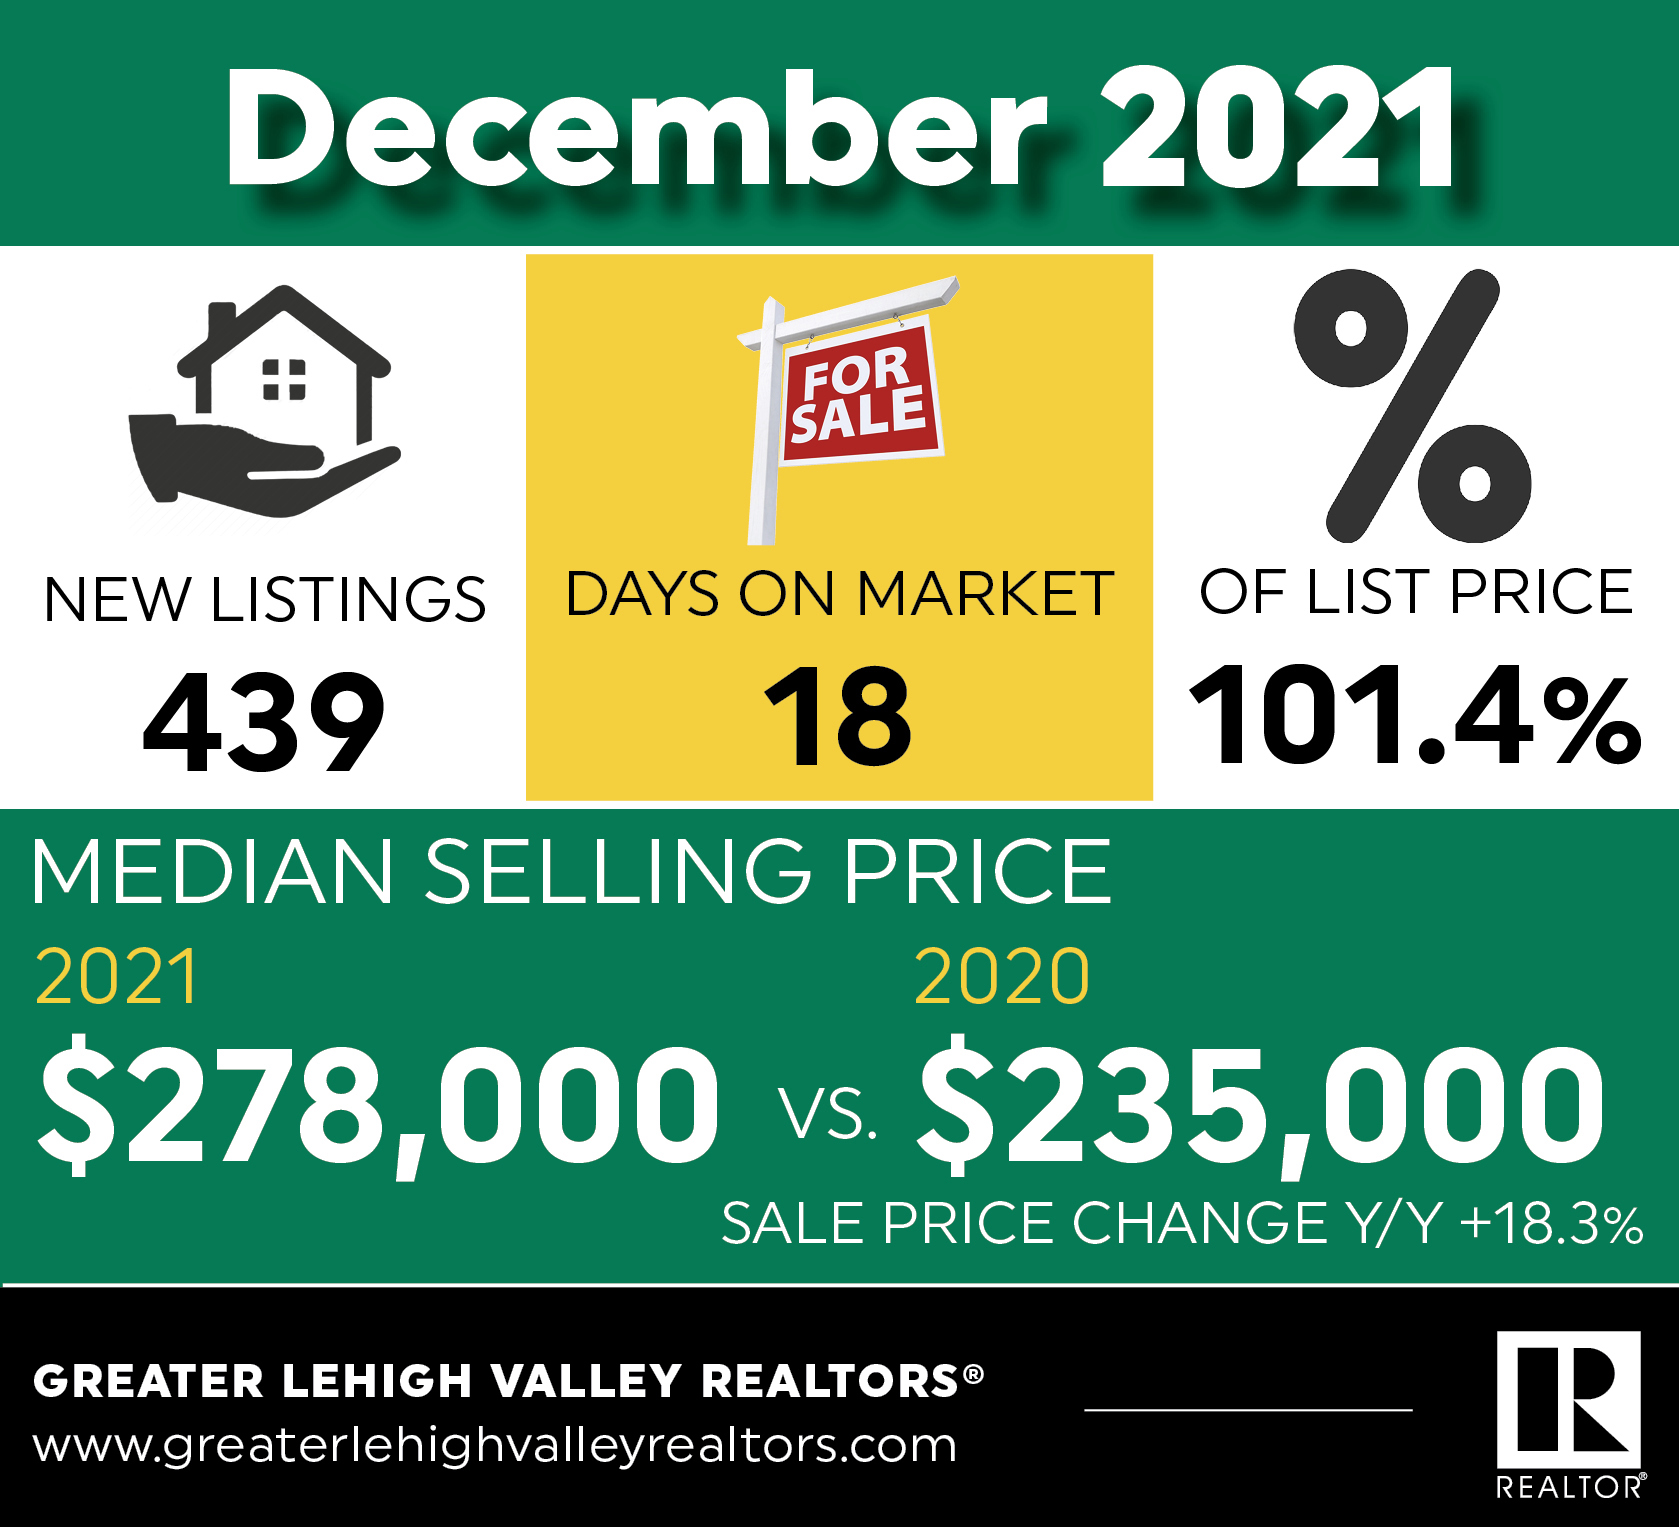 Sales Prices Reach New Heights in Lehigh, Northampton Counties